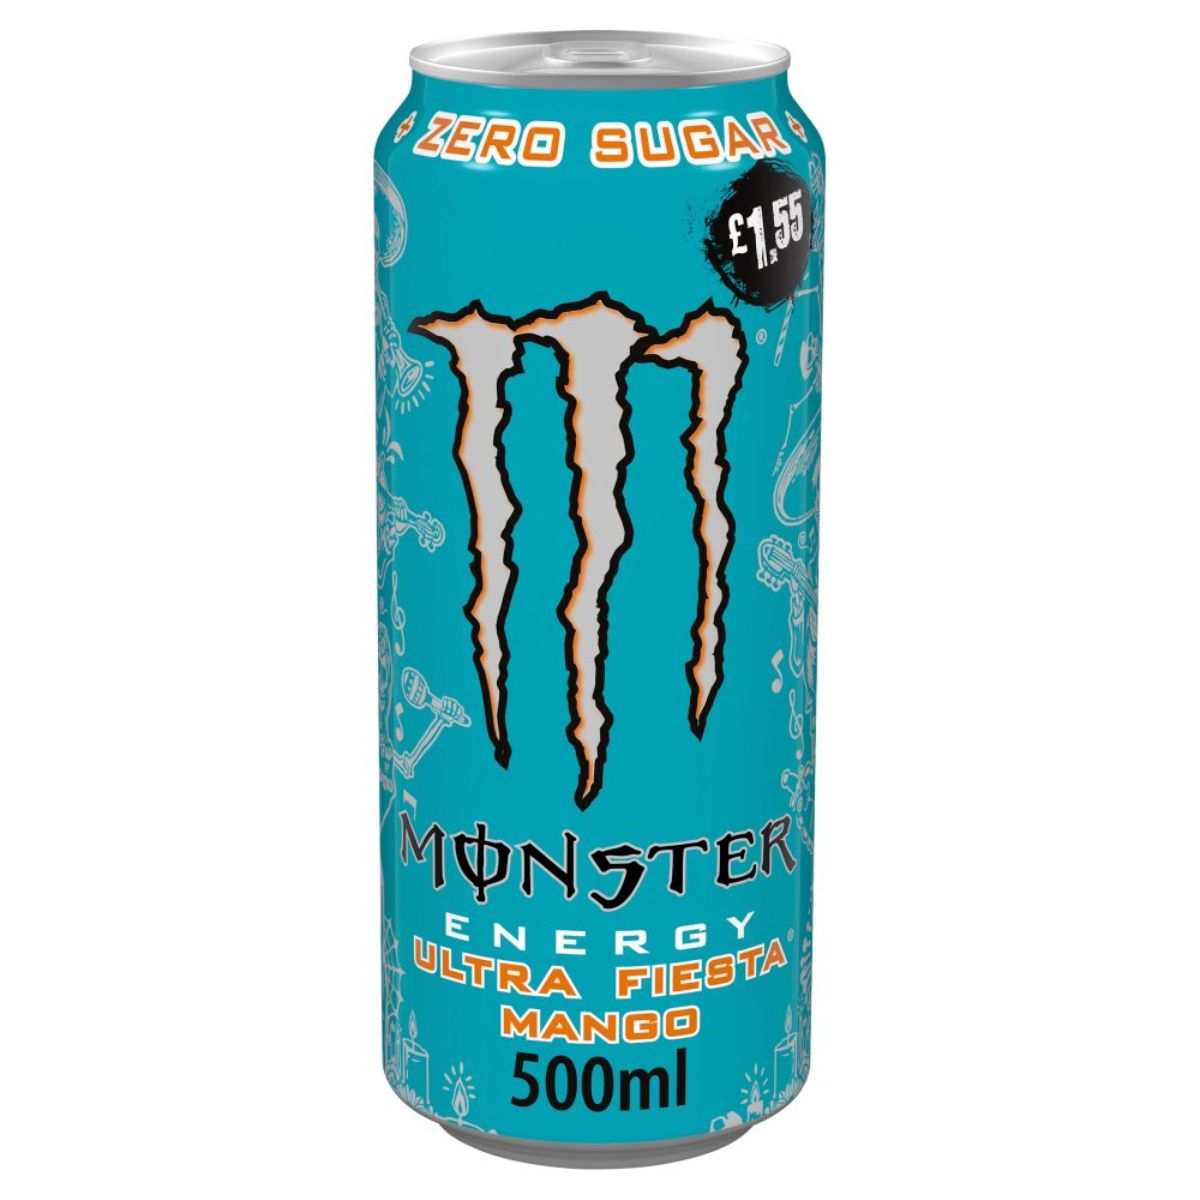 A can of Monster - Ultra Fiesta Mango - 500ml energy drink on a white background.